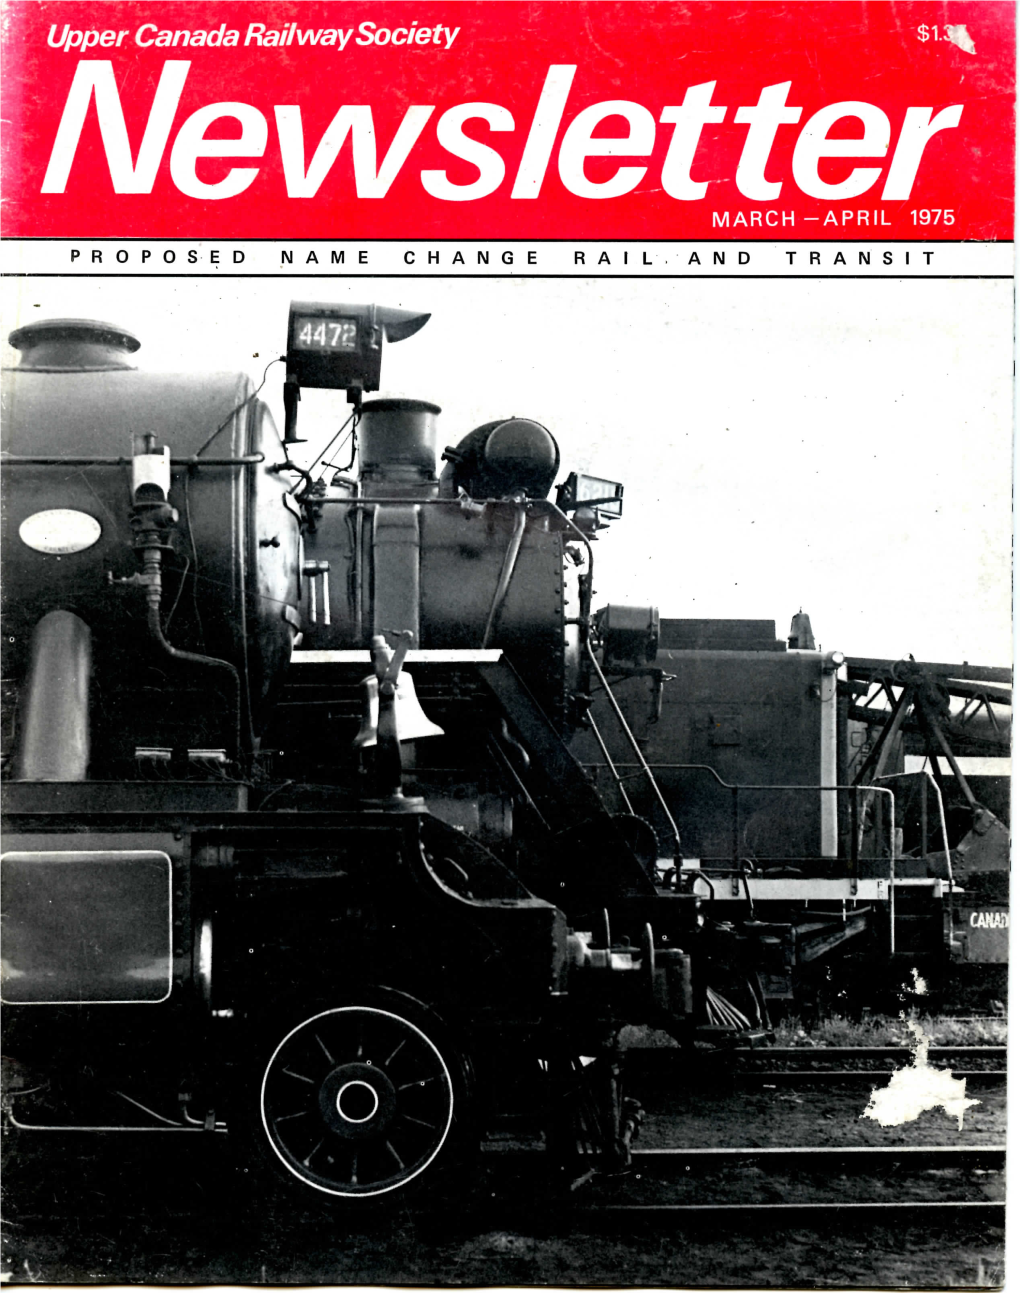 Upper Canada Railway Society Is' a Pioneer in Canadian Railway Publications, Having Originated in 1935 As the Toronto International Engine Picture Club